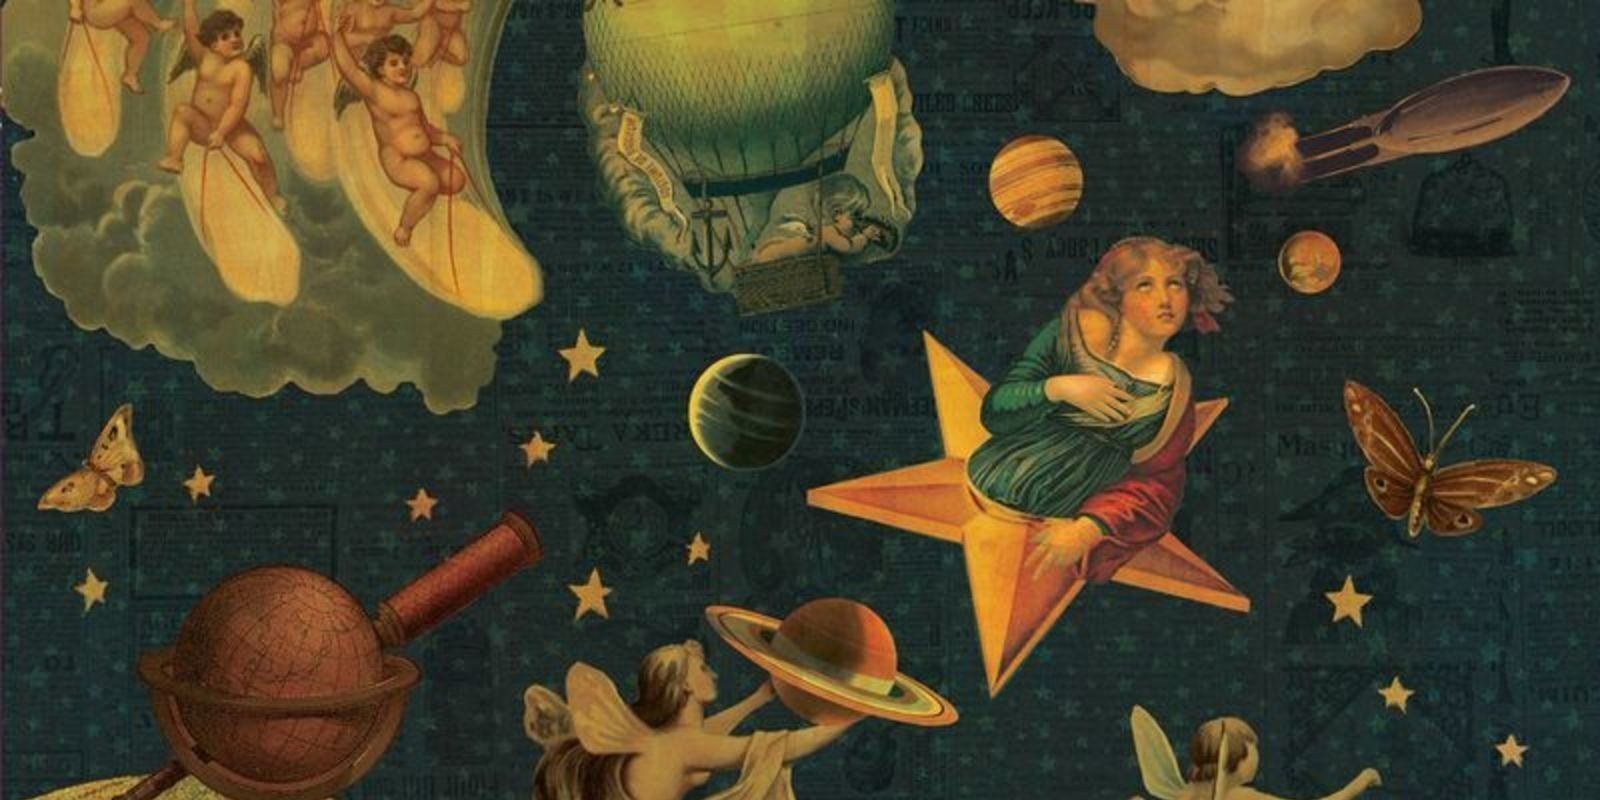 Cover art of Mellon Collie and the Infinite Sadness